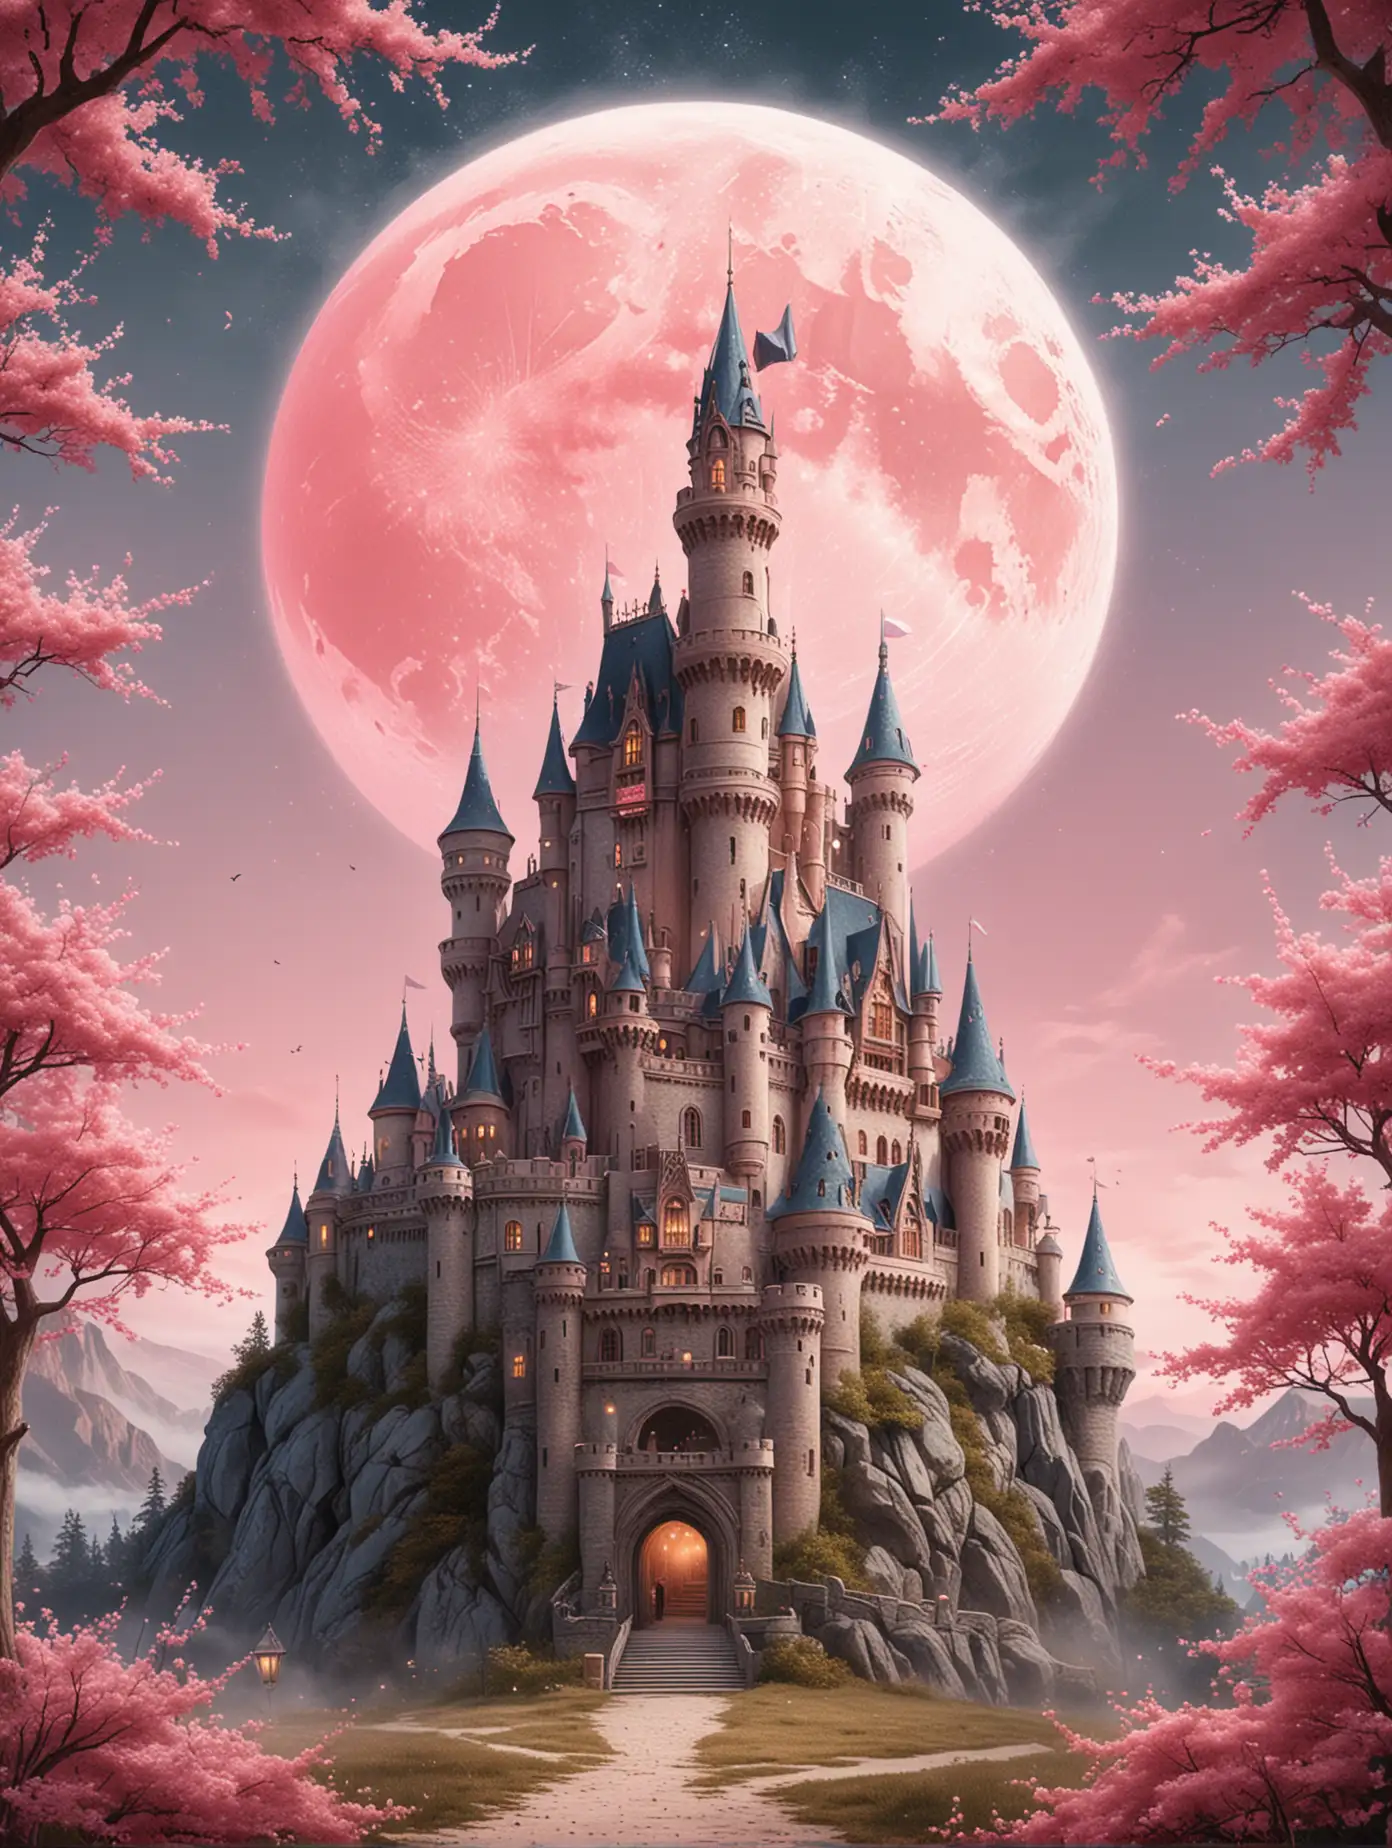 Illustration of a magical fairytale castle, it's the daytime, there's the pink moon, up close